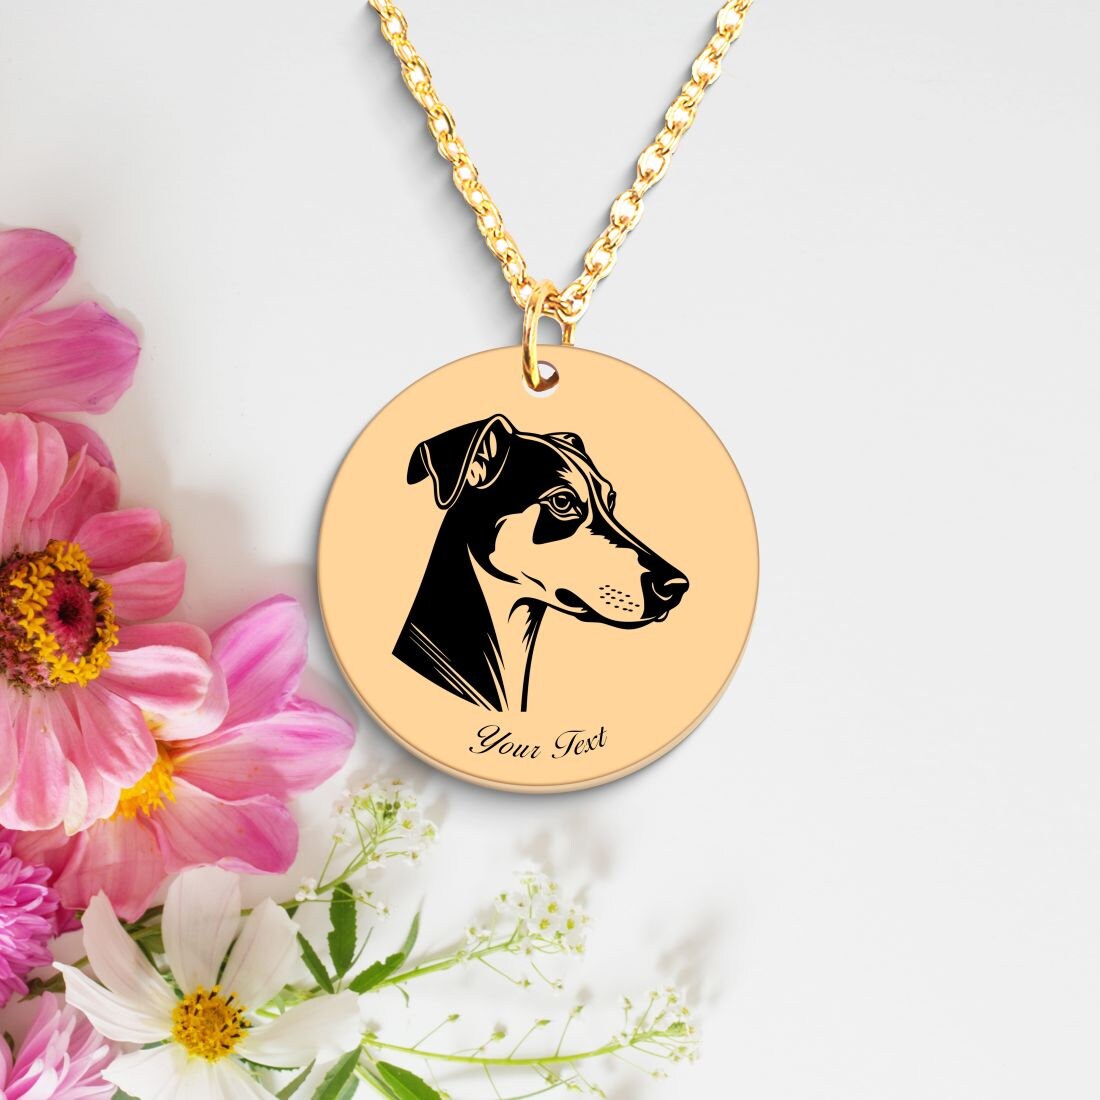 Whippet Dog Portrait Necklace - Personalizable Jewelry